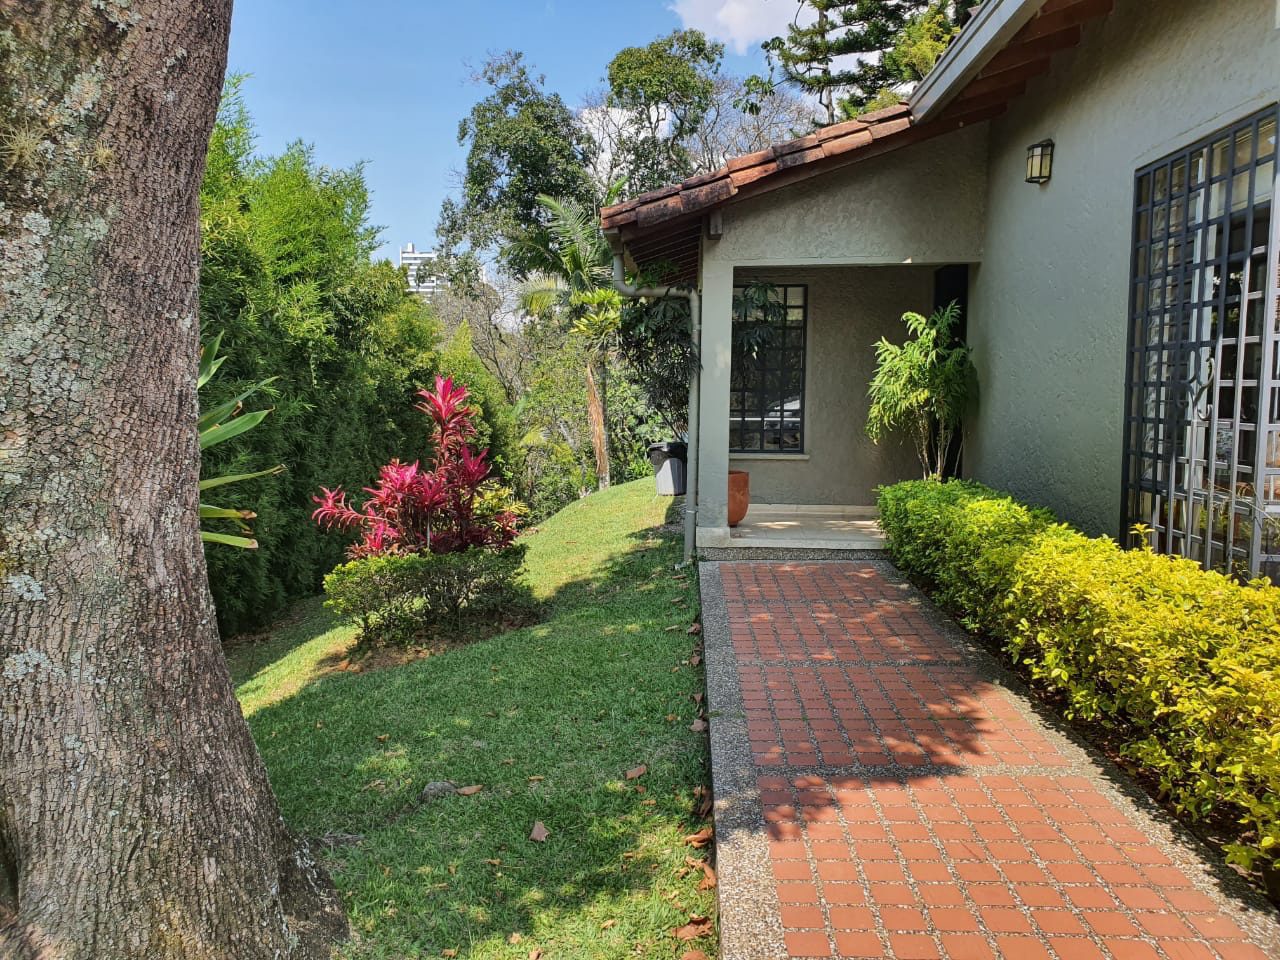 Well Located Stand-Alone Envigado Home On 2/3rd Acre Surrounded By Lush Natural Forest